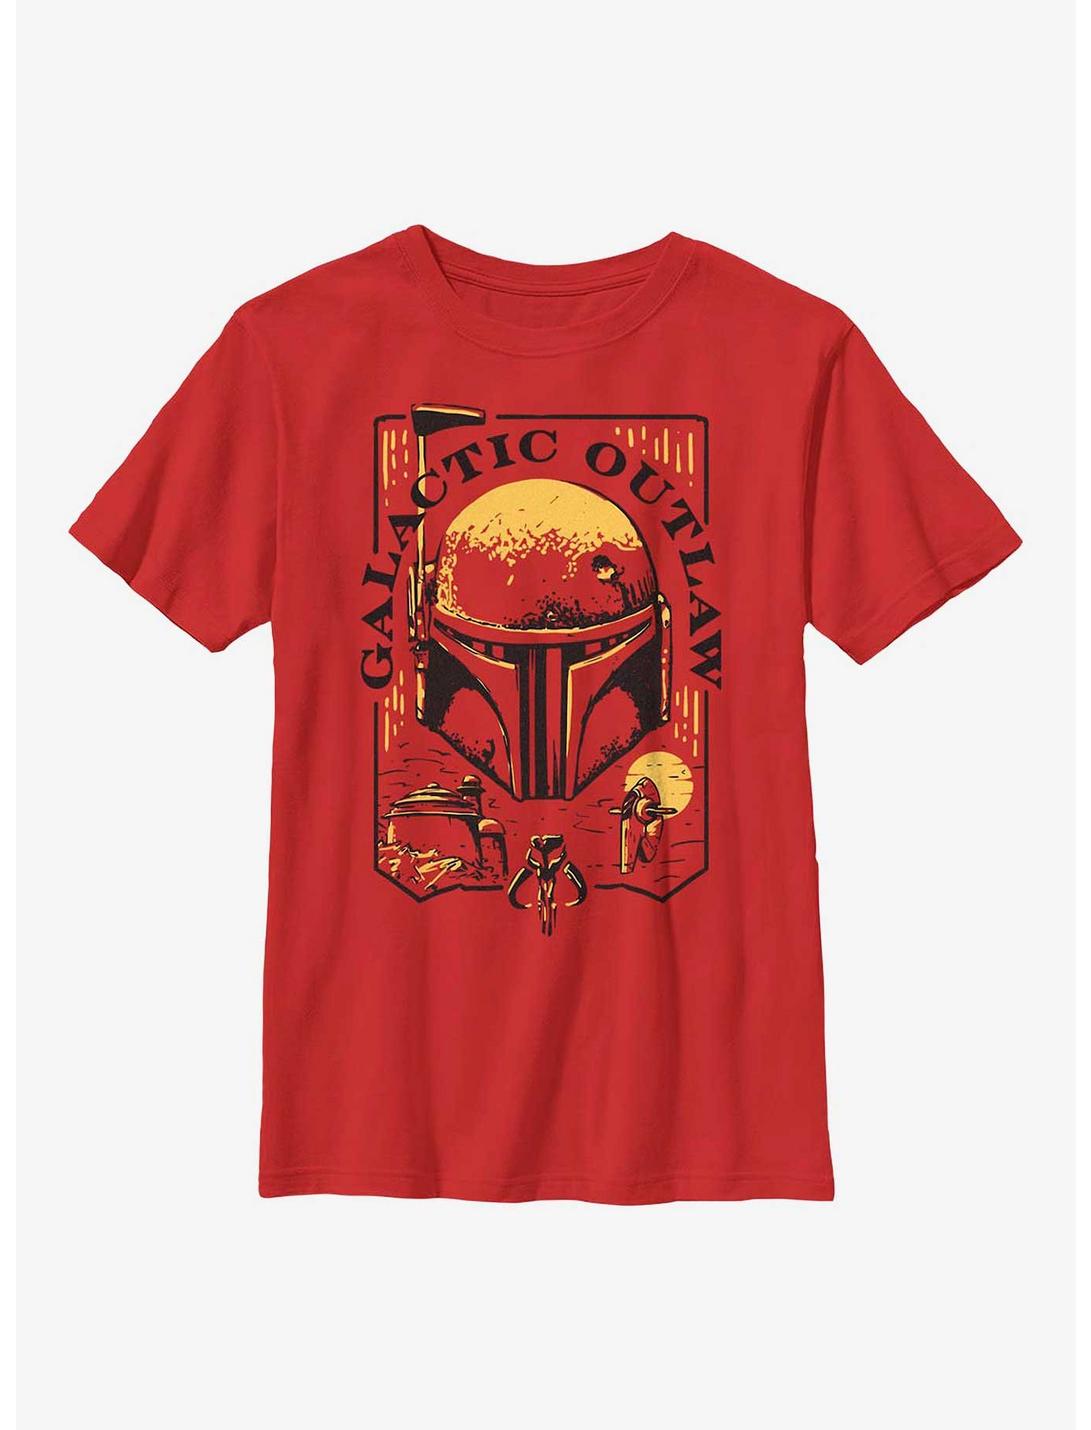 Star Wars: The Book Of Boba Fett Galactic Outlaw Logo Youth T-Shirt, RED, hi-res